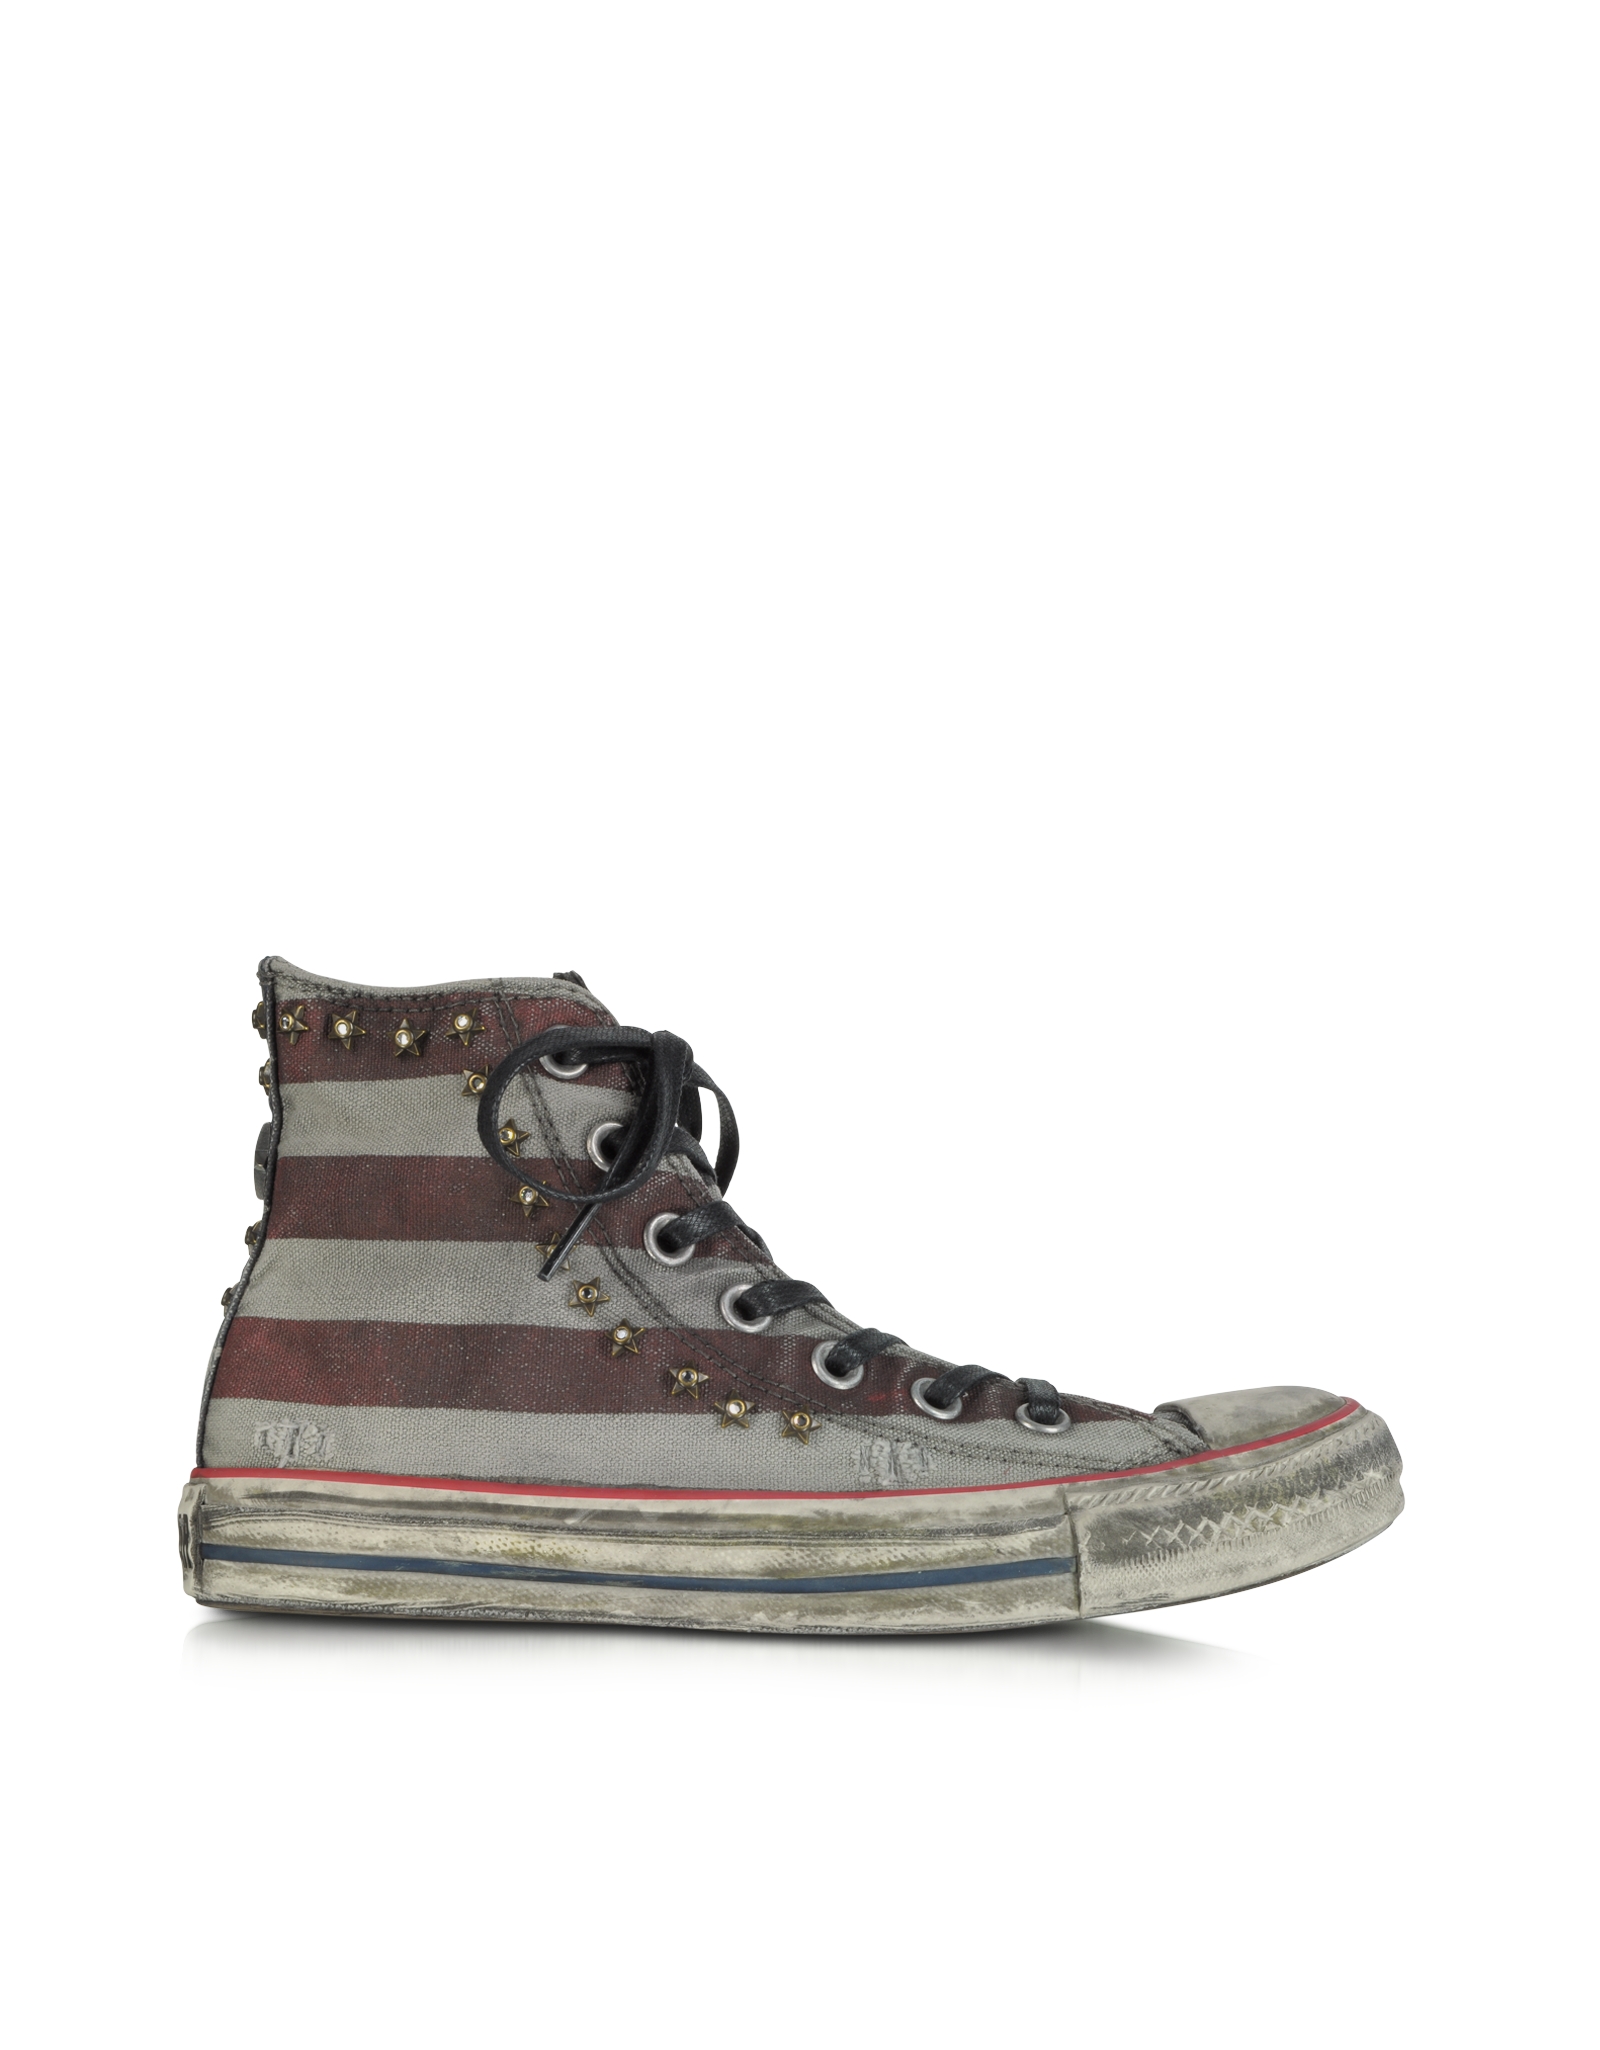 Converse Distressed Canvas High Top Sneaker Wstars Crystals in Gray | Lyst